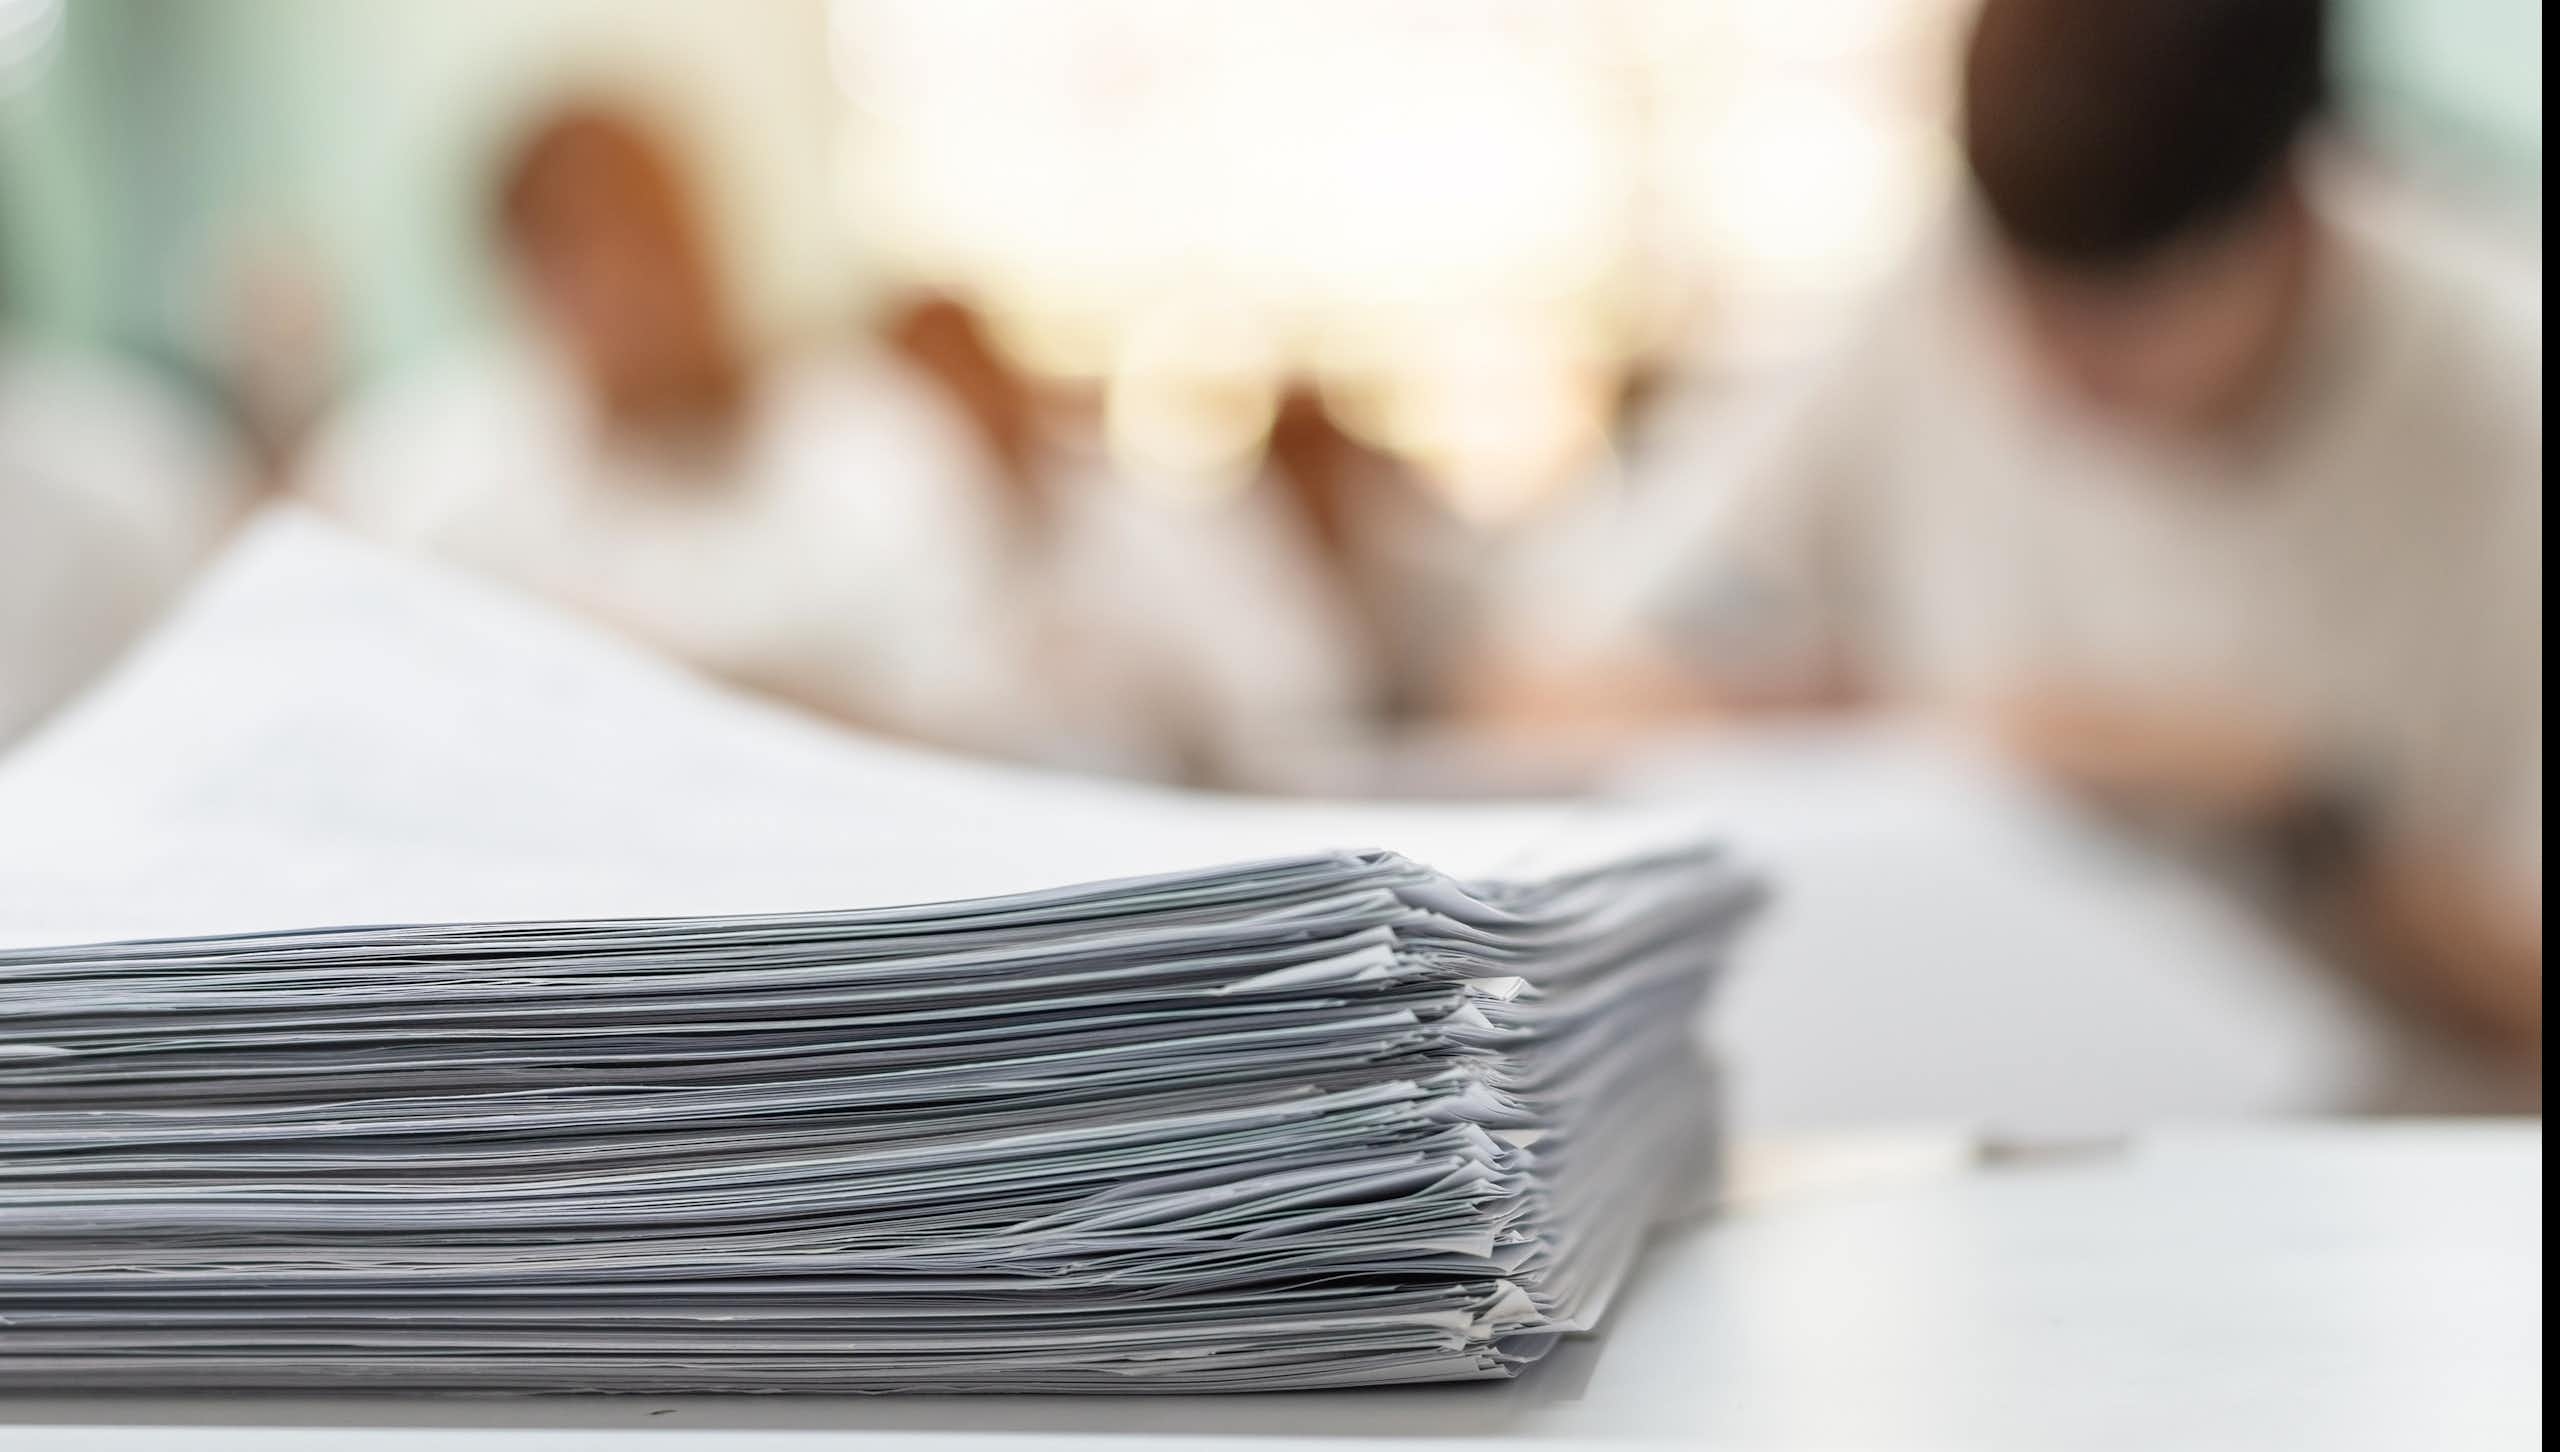 A huge pile of paperwork in the foreground with the blurred out background shows people working at desks.